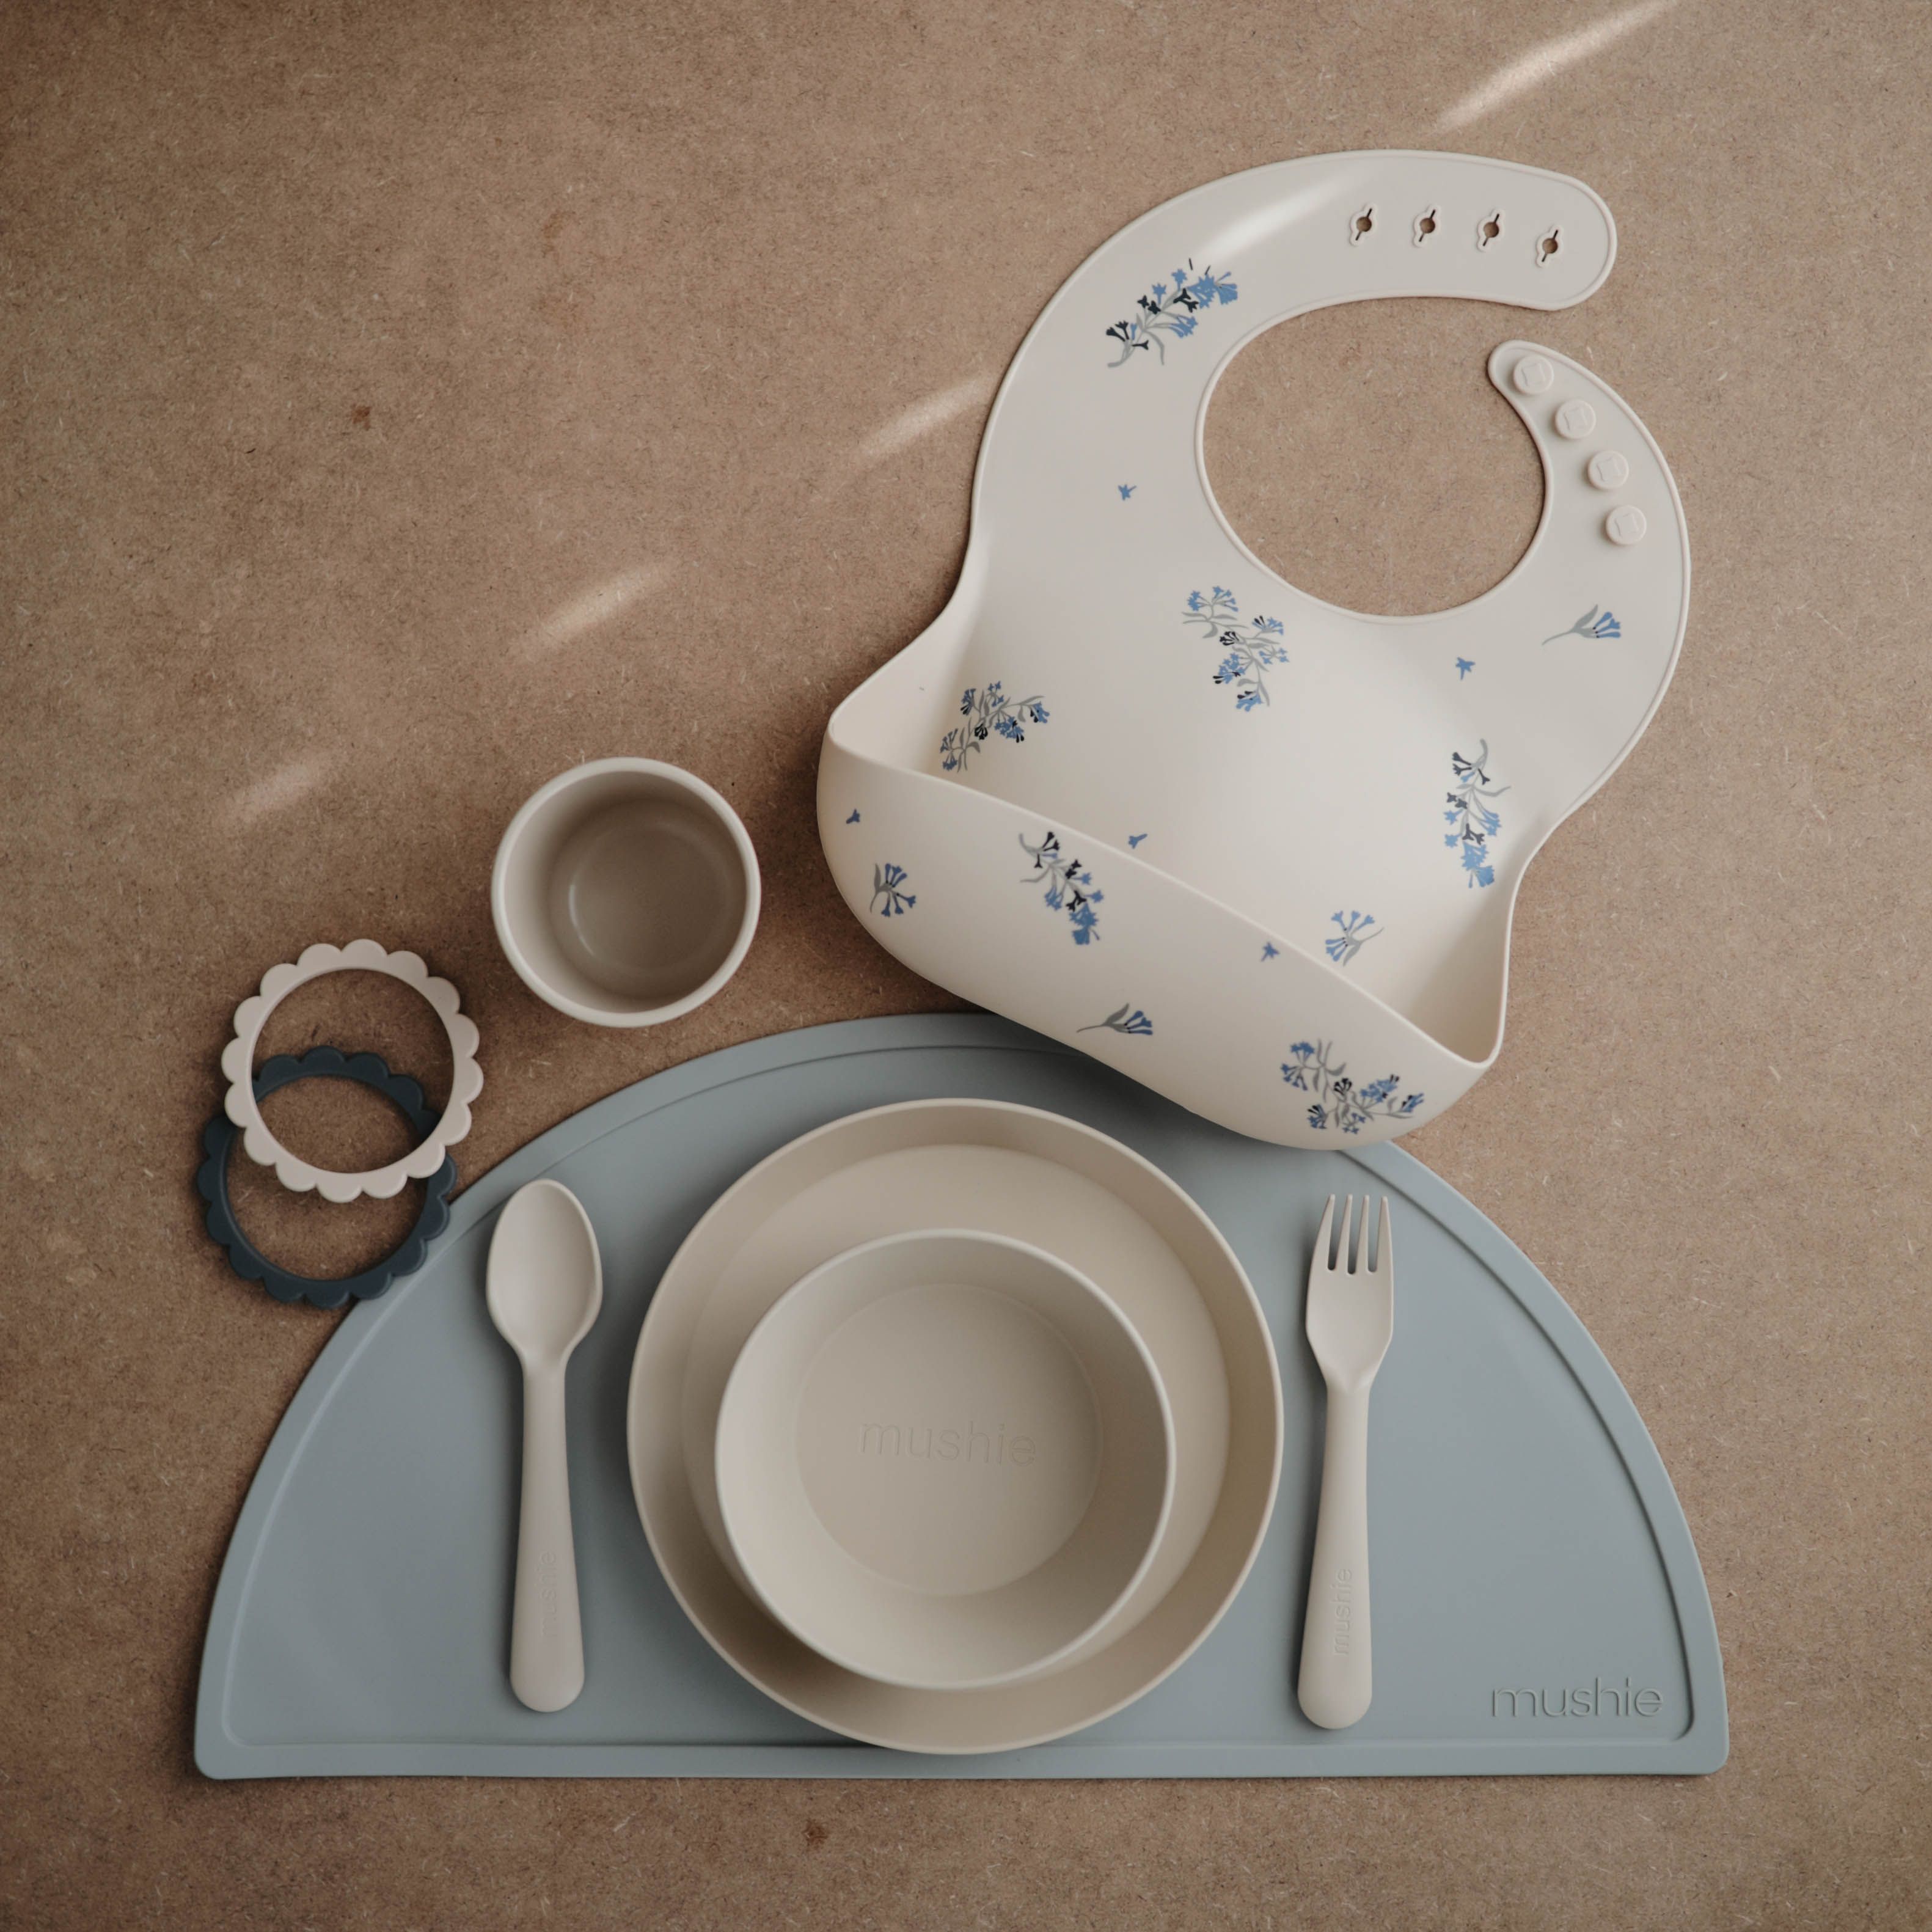 Various Mushie dinnerware products - silicone bib, round bowl, round place, cutlery and placemat